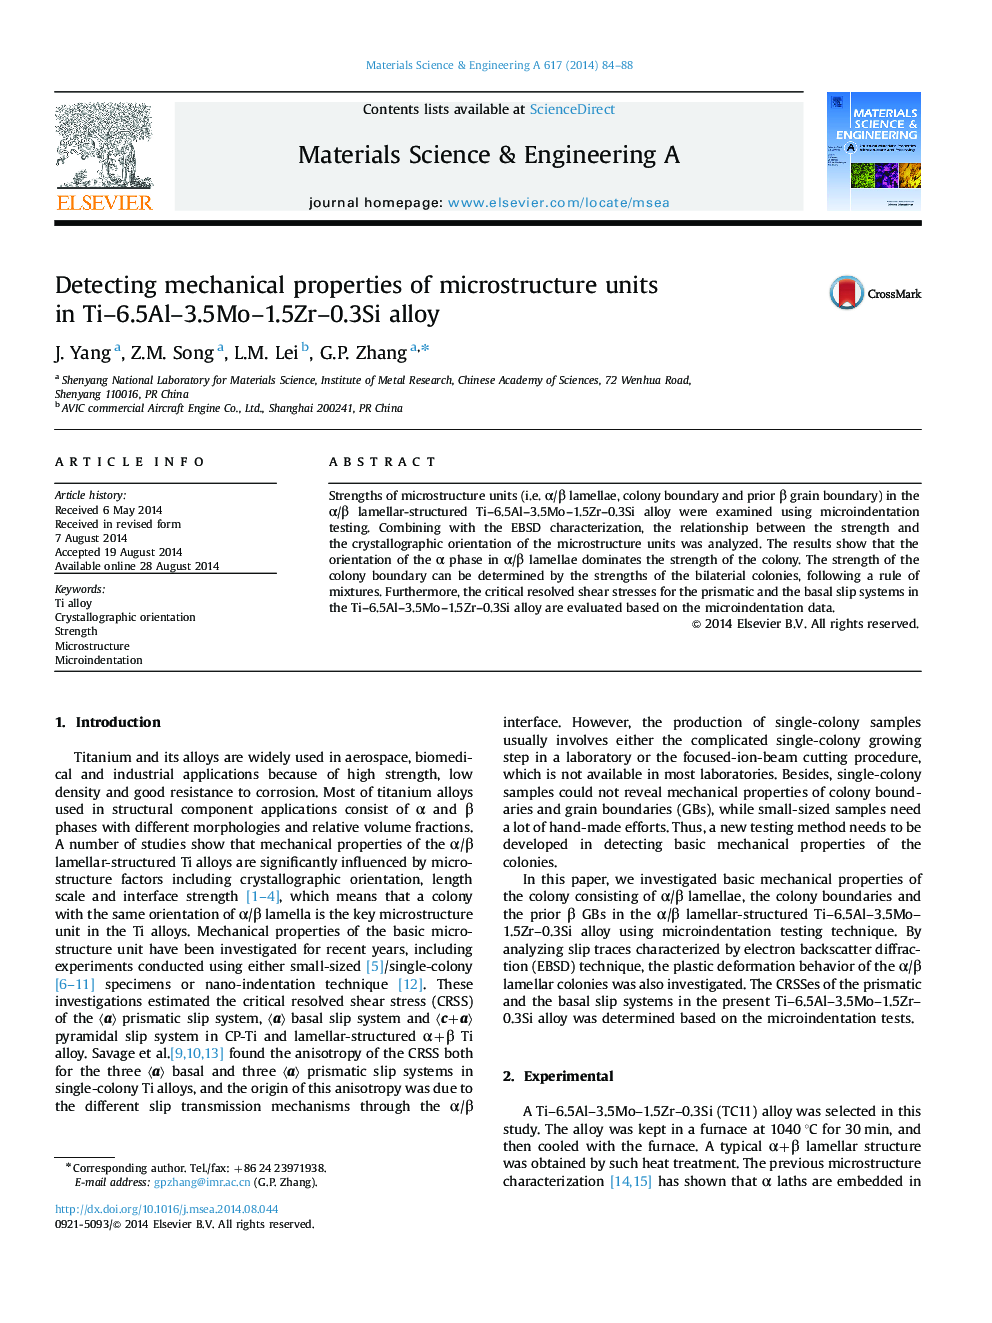 Detecting mechanical properties of microstructure units in Ti-6.5Al-3.5Mo-1.5Zr-0.3Si alloy